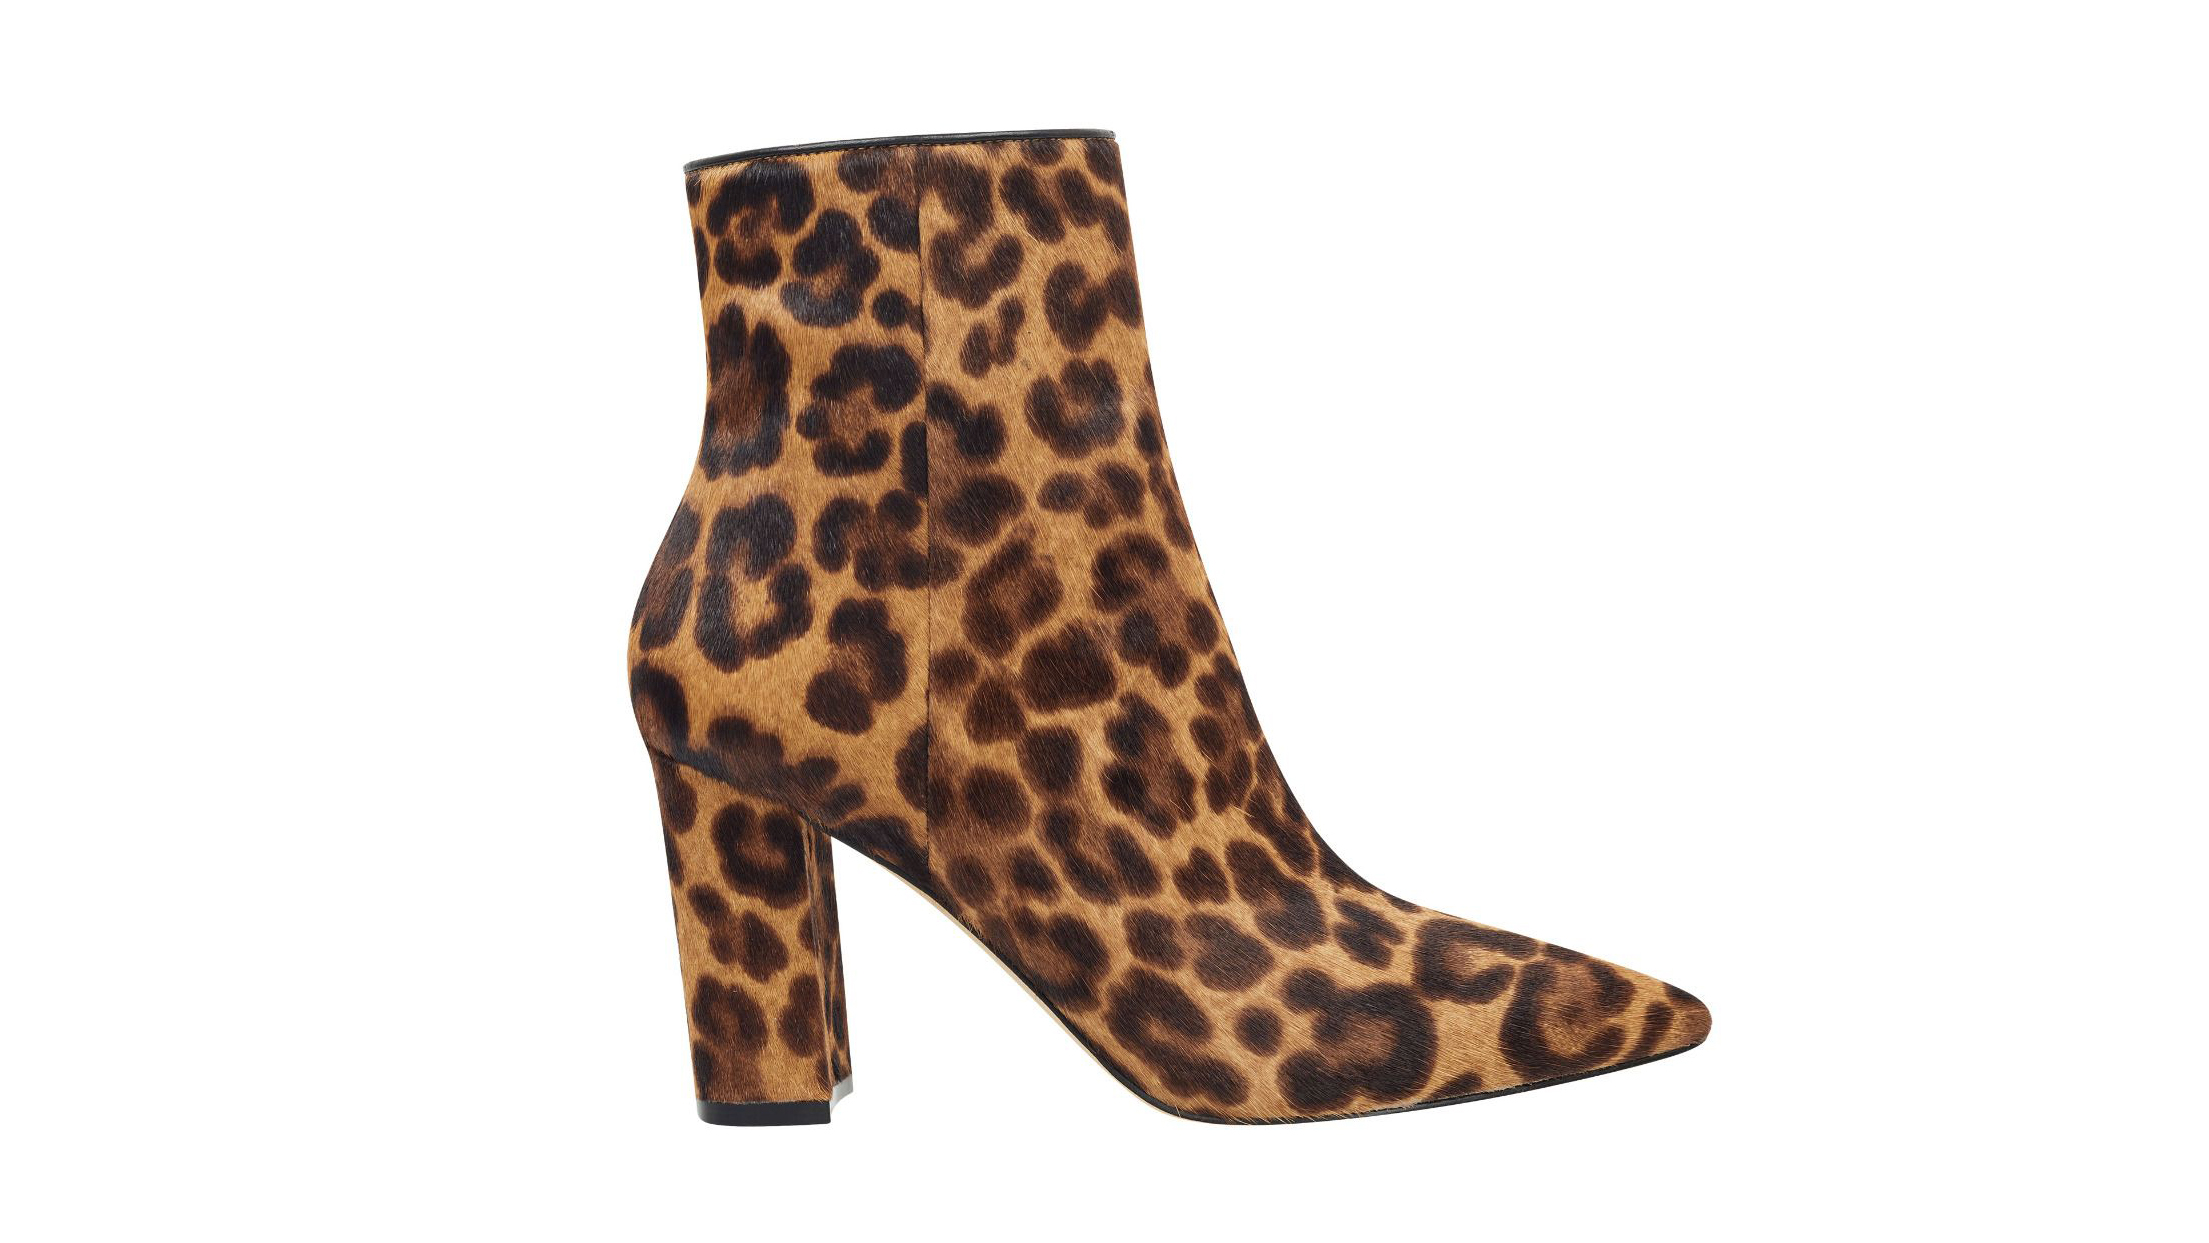 Details about  / VIA SPIGA Cheetah Print Ankle Booties Calf Hair Leather Animal Print Sz 6.5 NEW